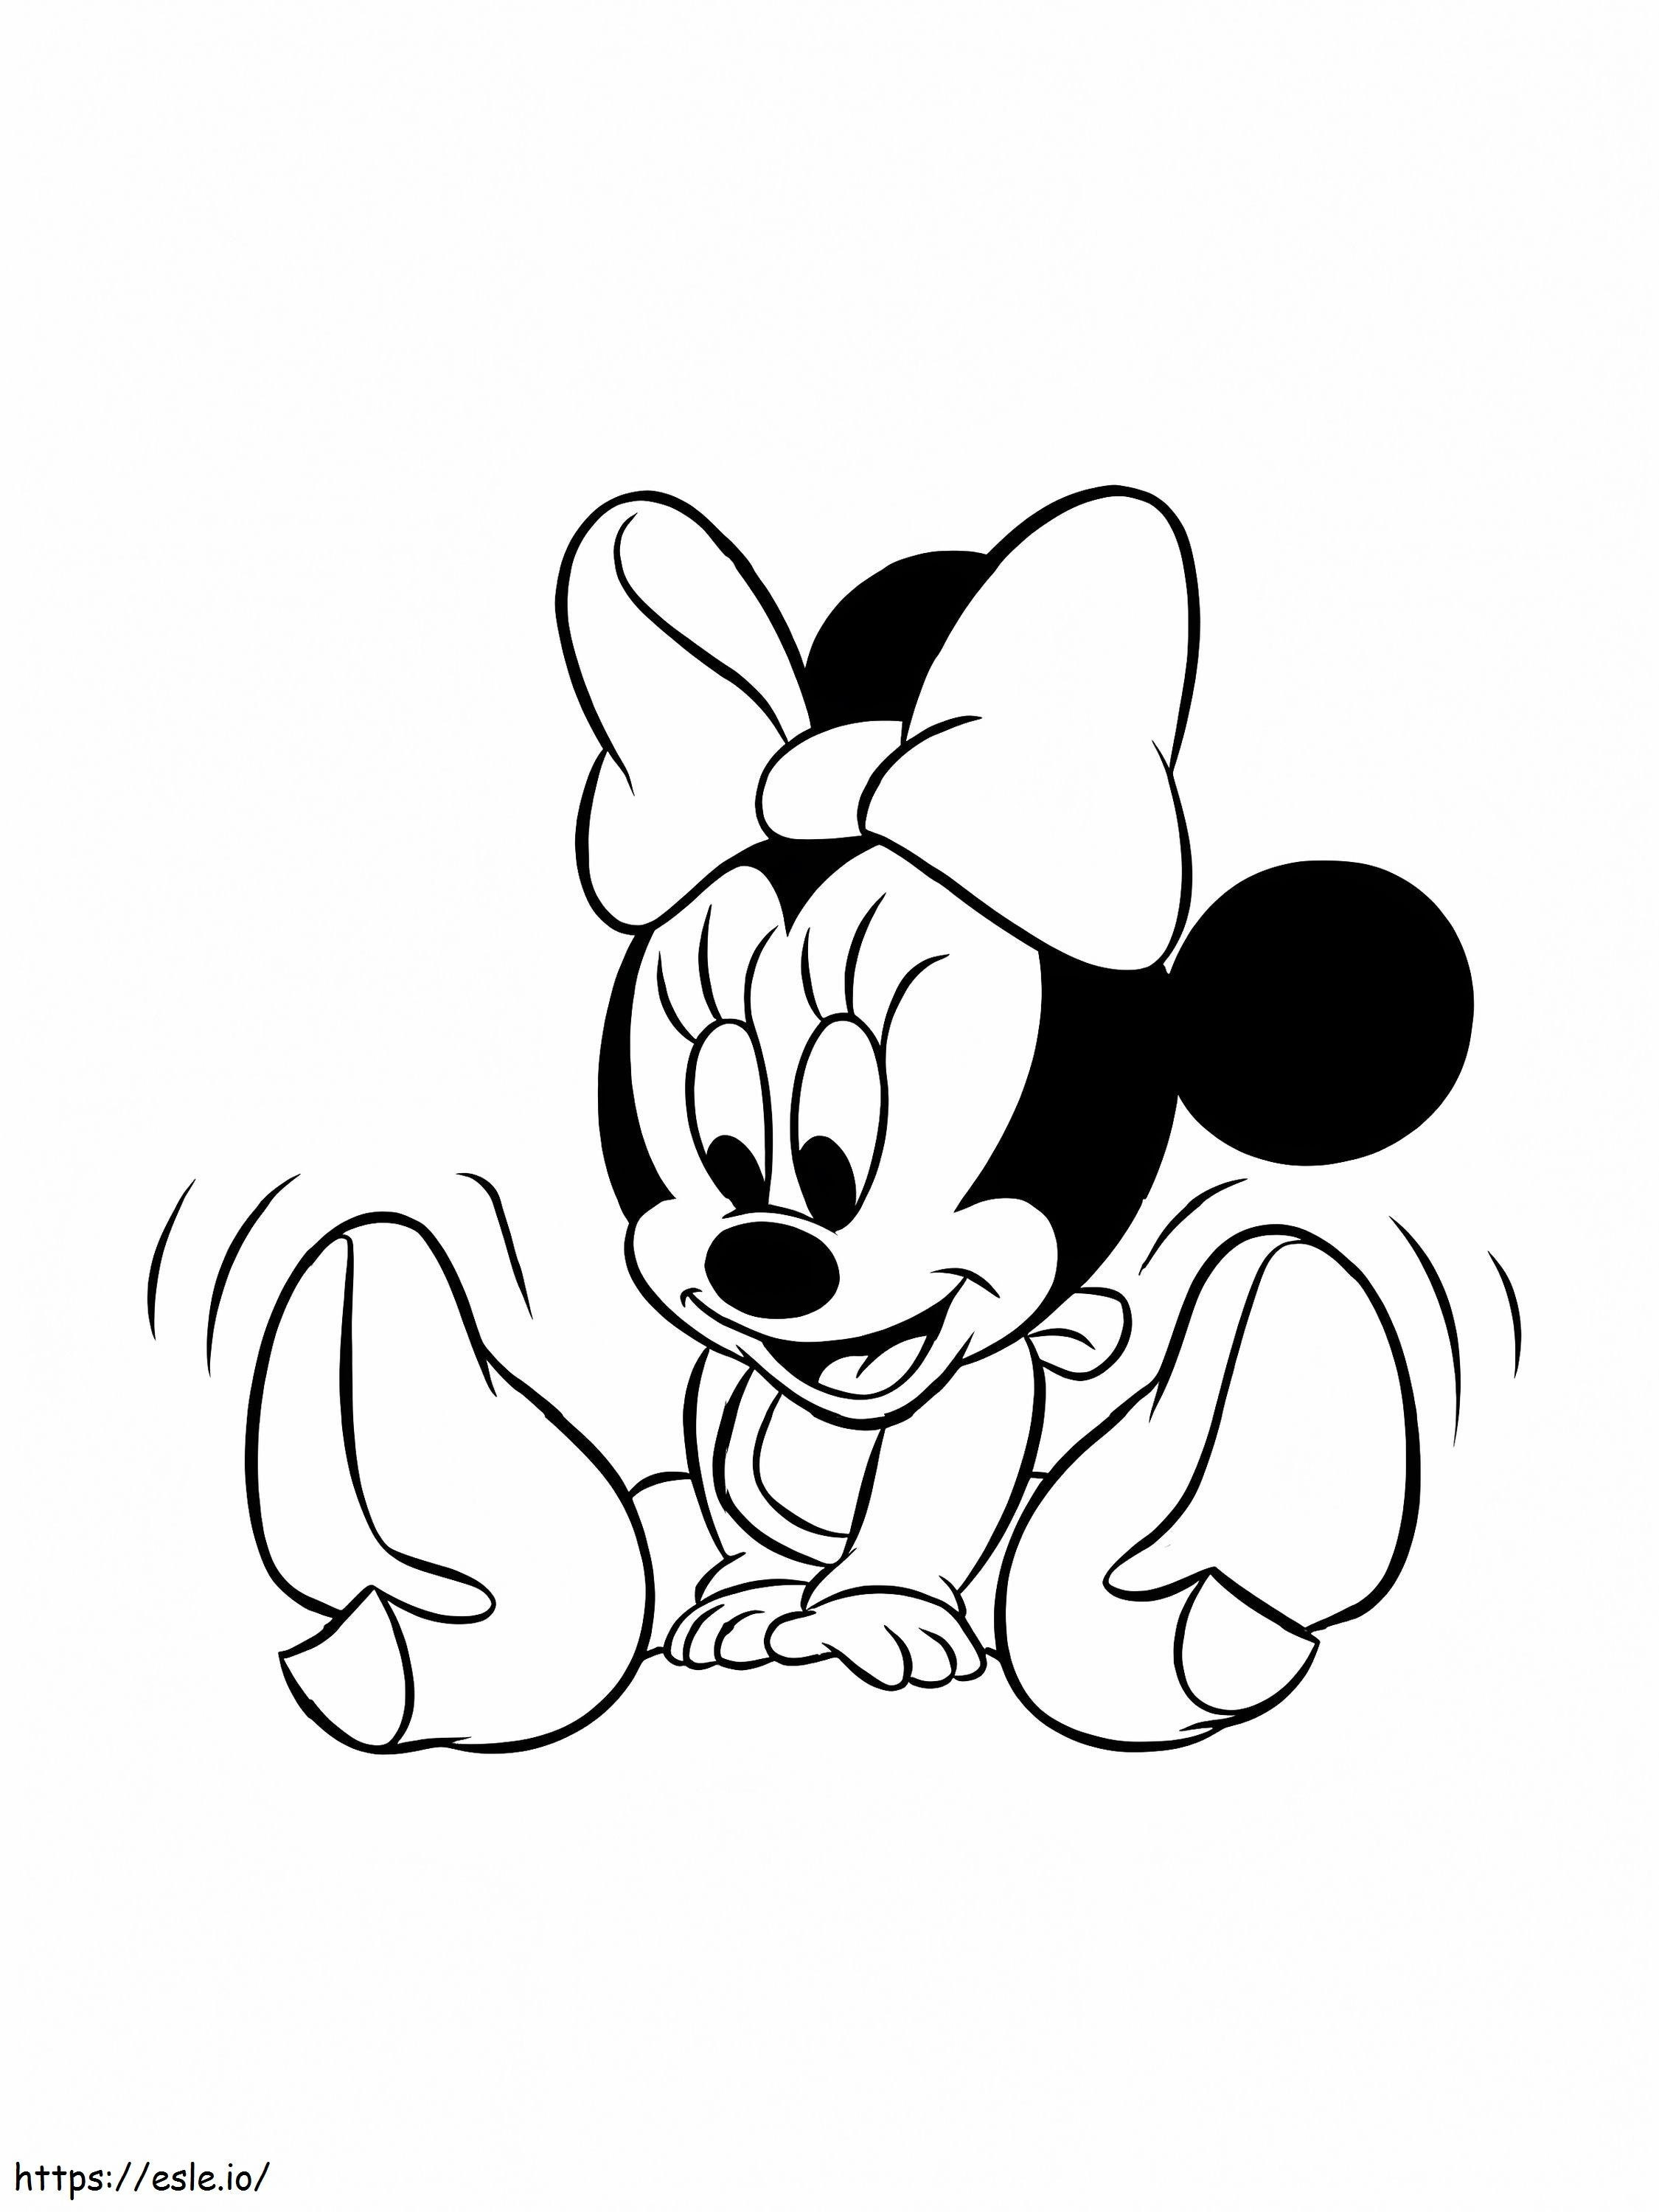 Cute Disney Baby Minnie coloring page